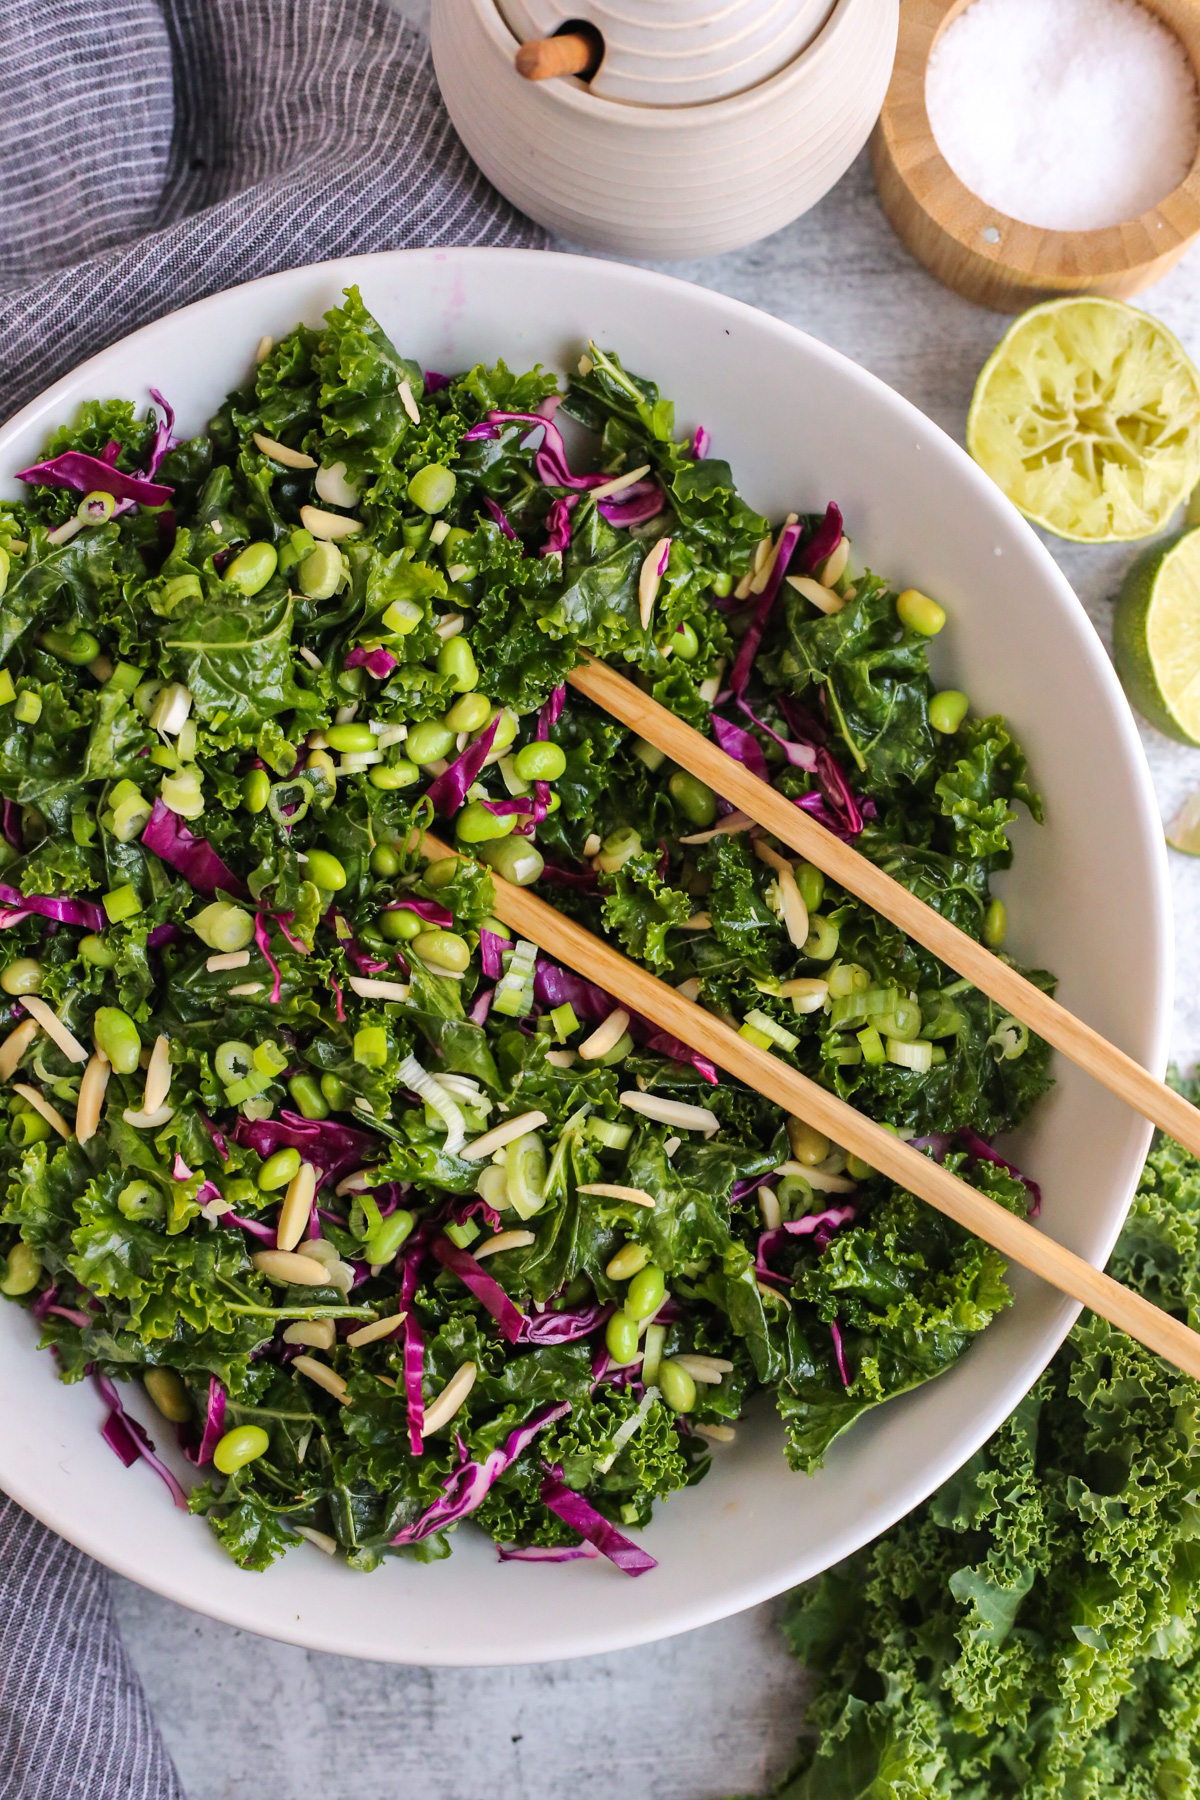 Overhead view of a large white mixing bowl filled with a massaged kale salad, shelled edamame, shredded red cabbage, slivered almonds, sliced green onions, and a light sesame-lime dressing, with a pair of wooden salad tongs ready to serve it